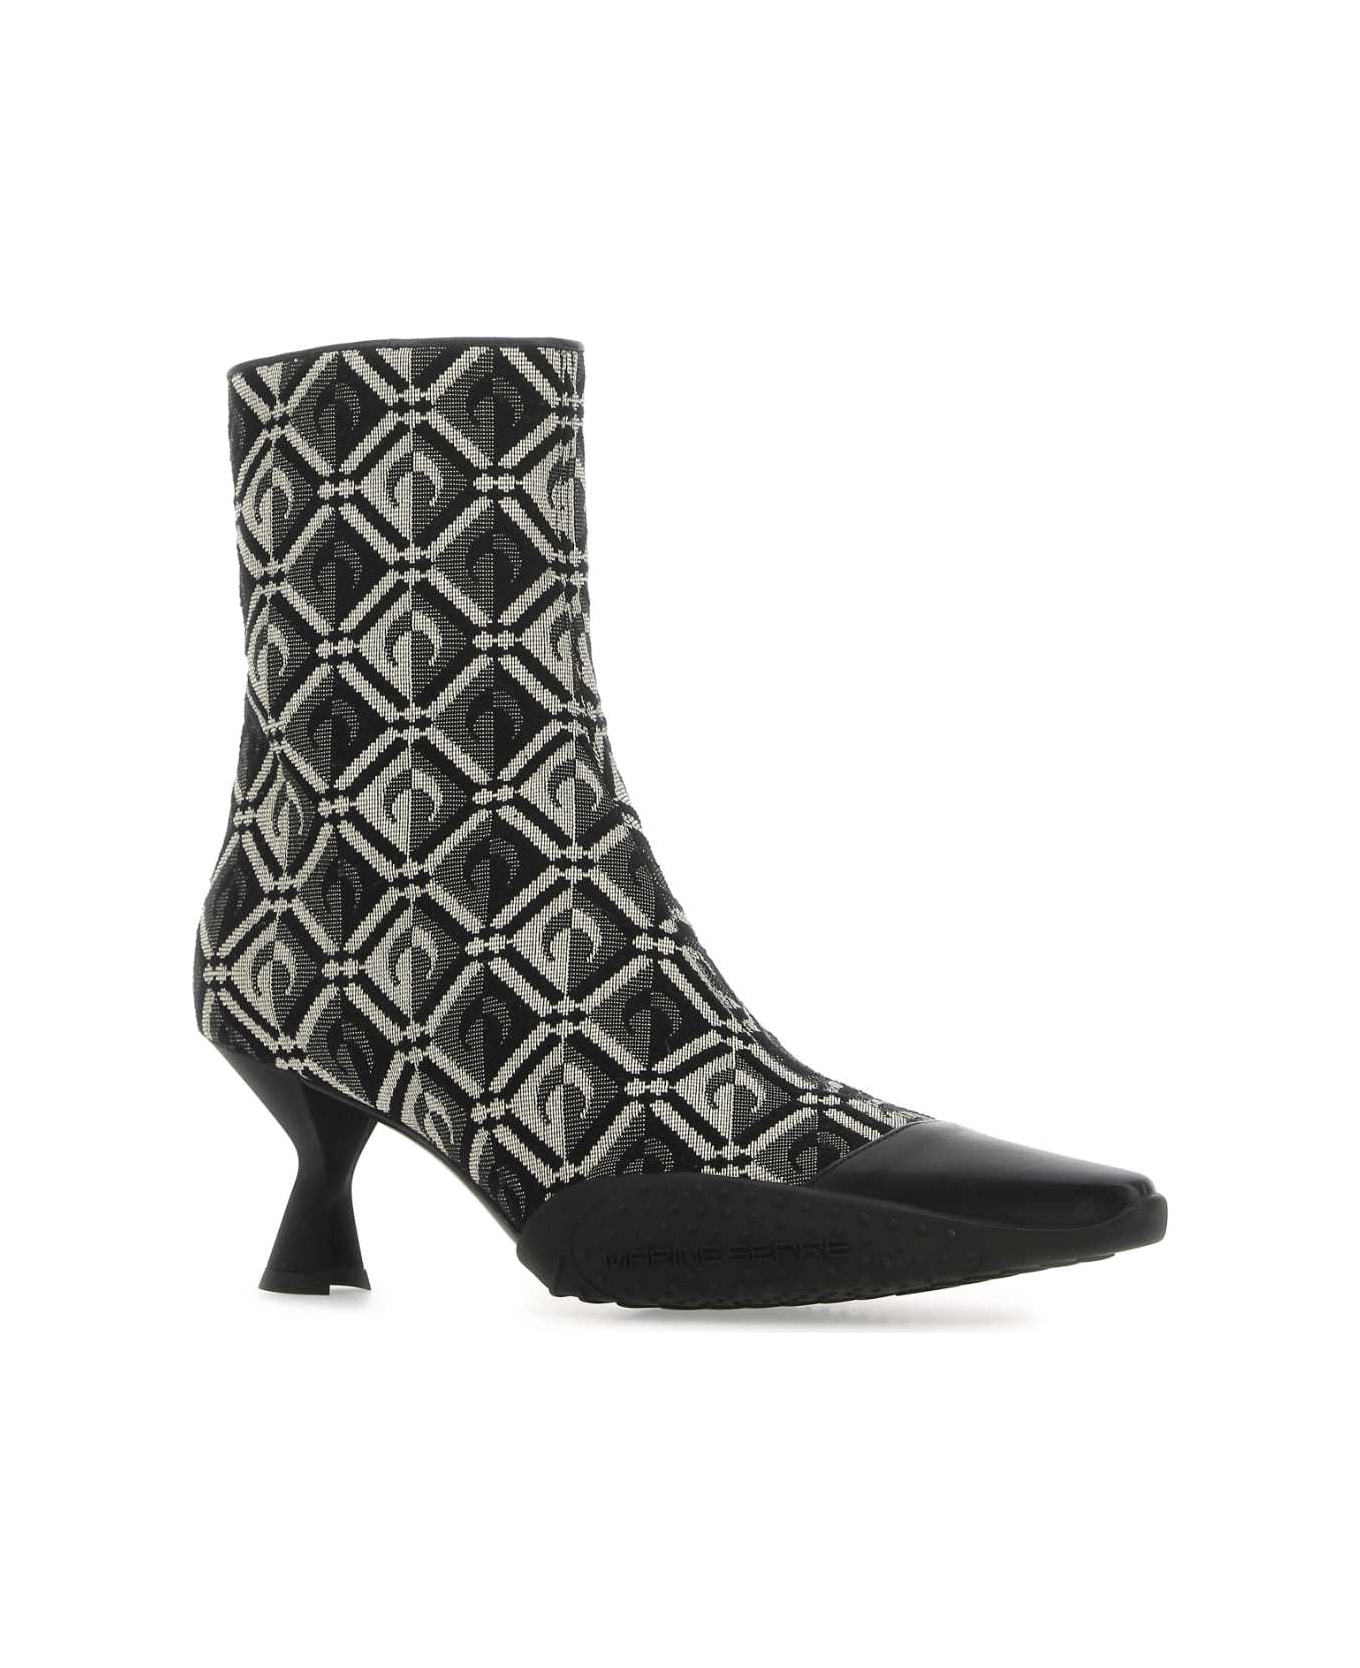 Marine Serre Embroidered Cotton Blend Moon Diamant Ankle Boots - 00 ブーツ